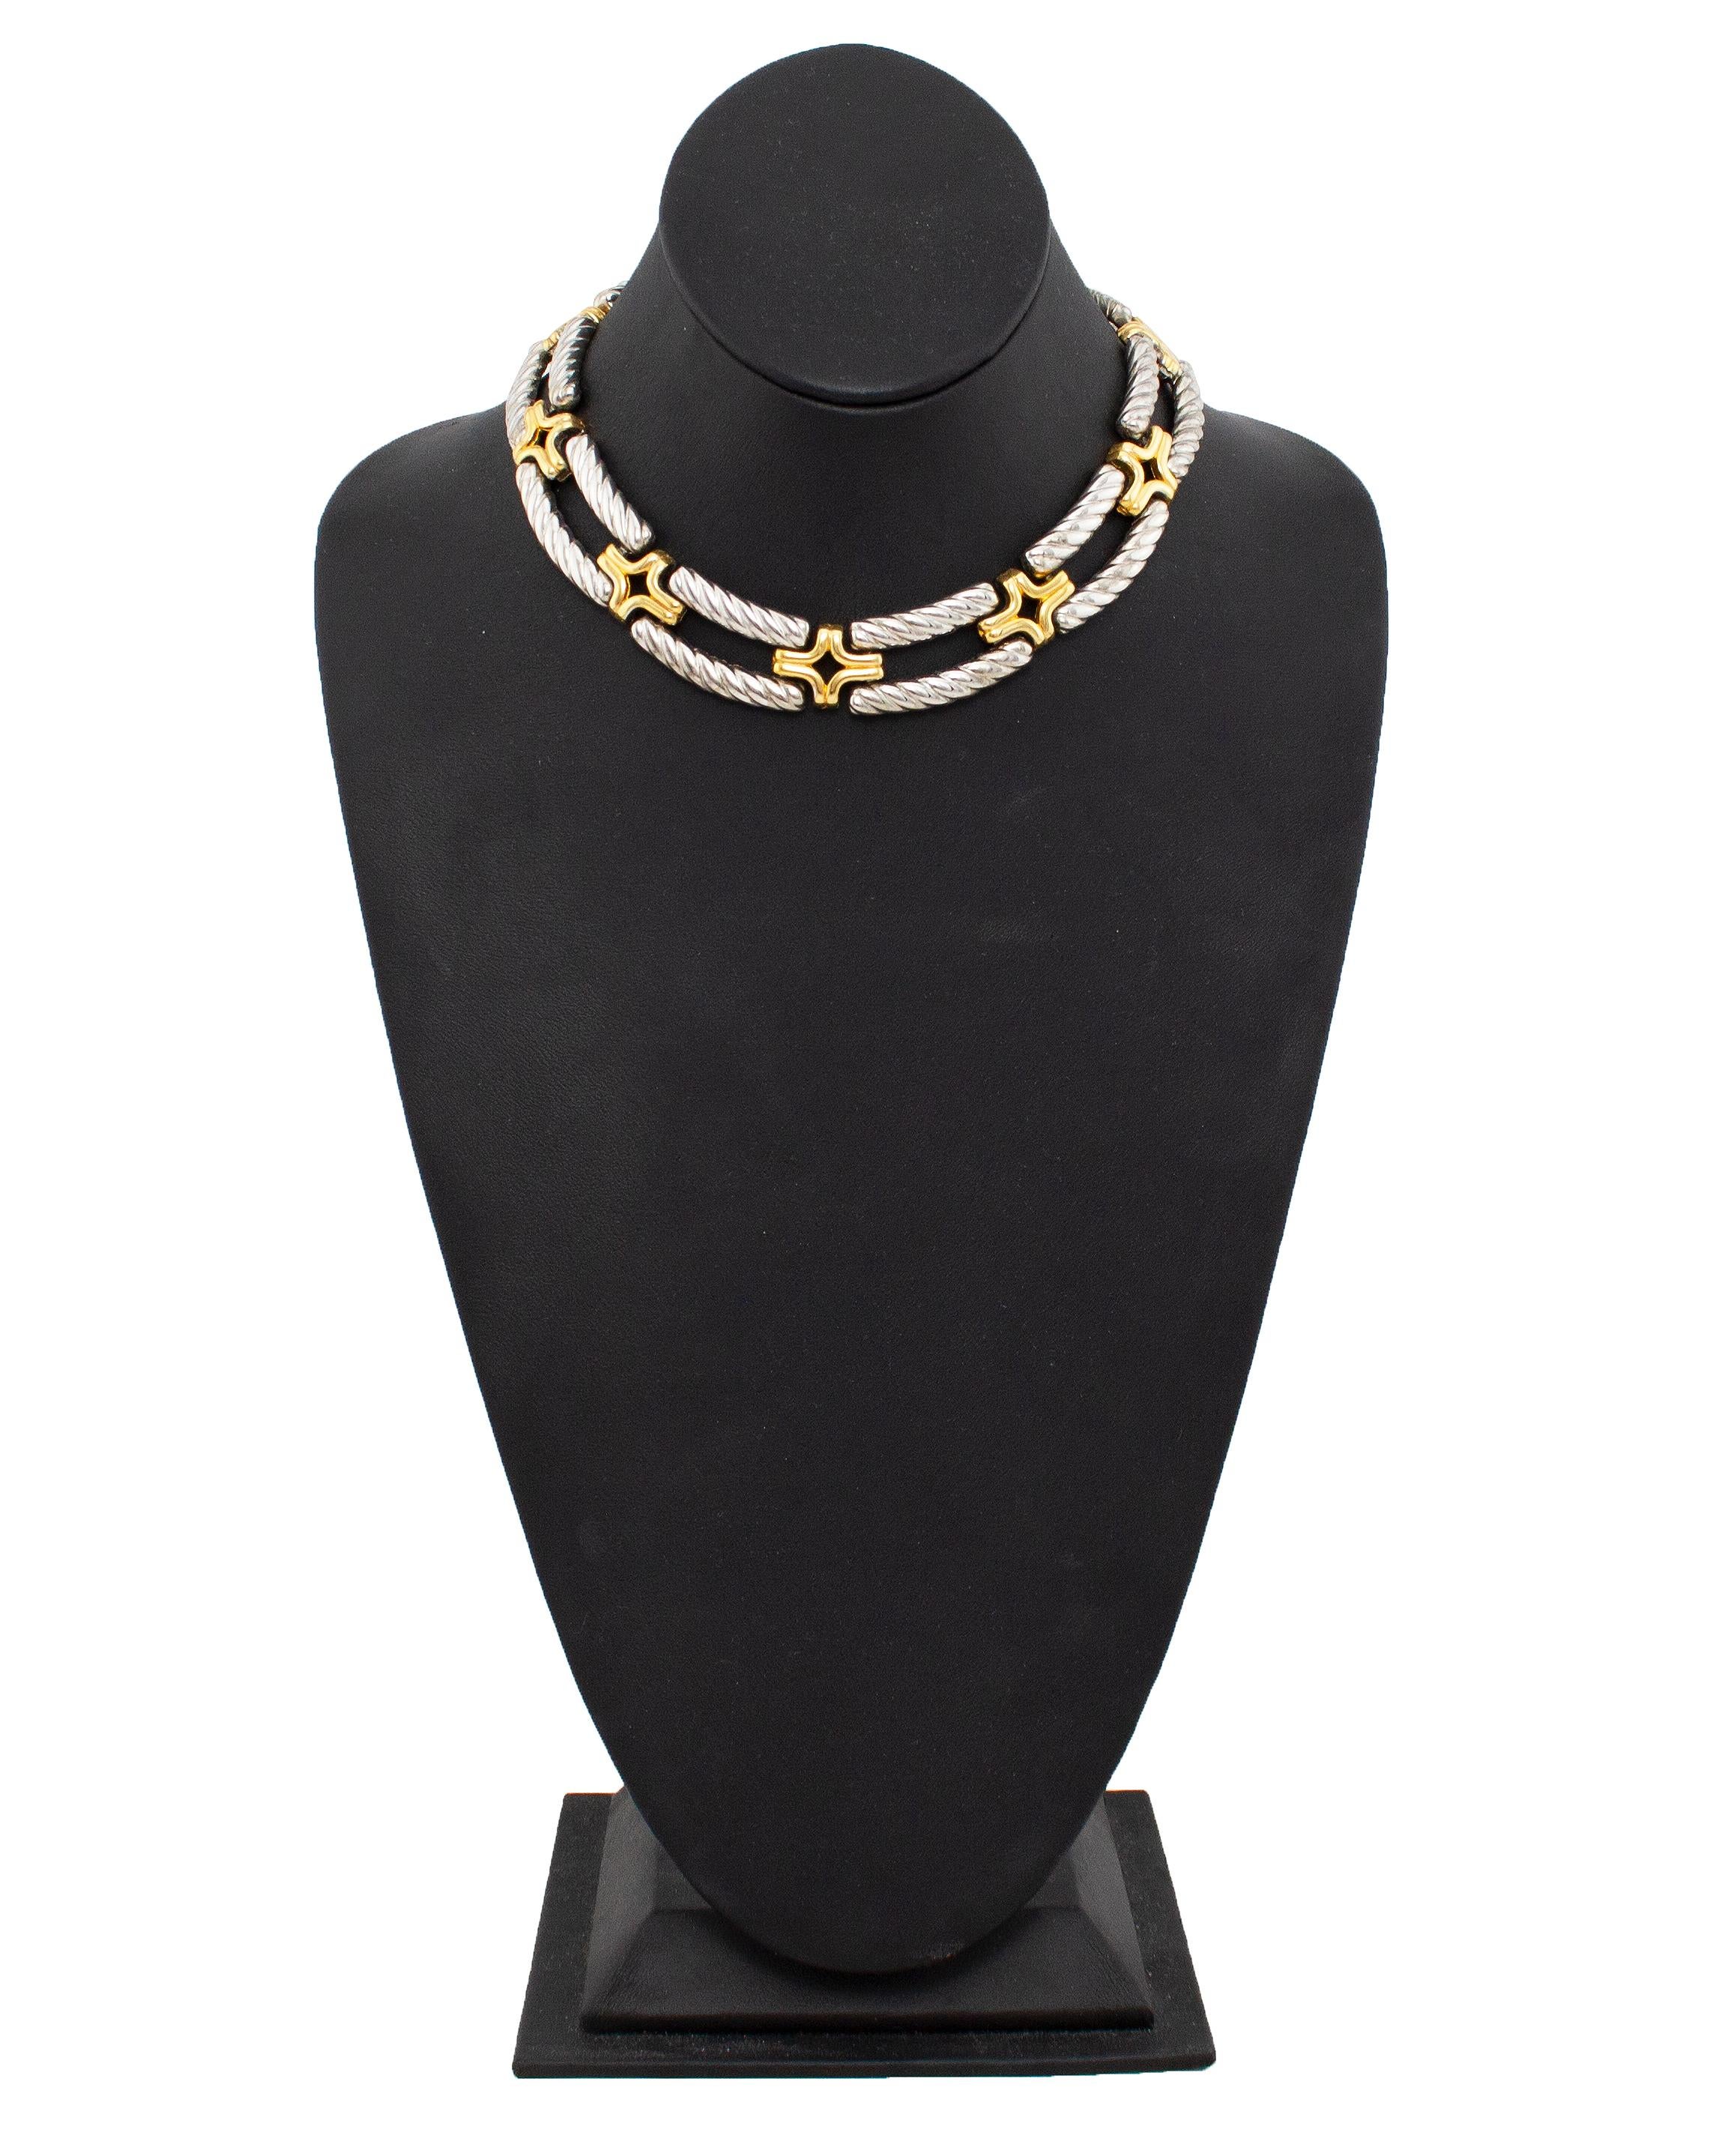 Fabulous 1980s Kenneth Jay Lane necklace. Twisted rope style silver tone metal with gold tone metal cross details. Choker style, this necklace sits tight to the neck but is lightweight and does not feel heavy when wearing. KJL marking on the back of